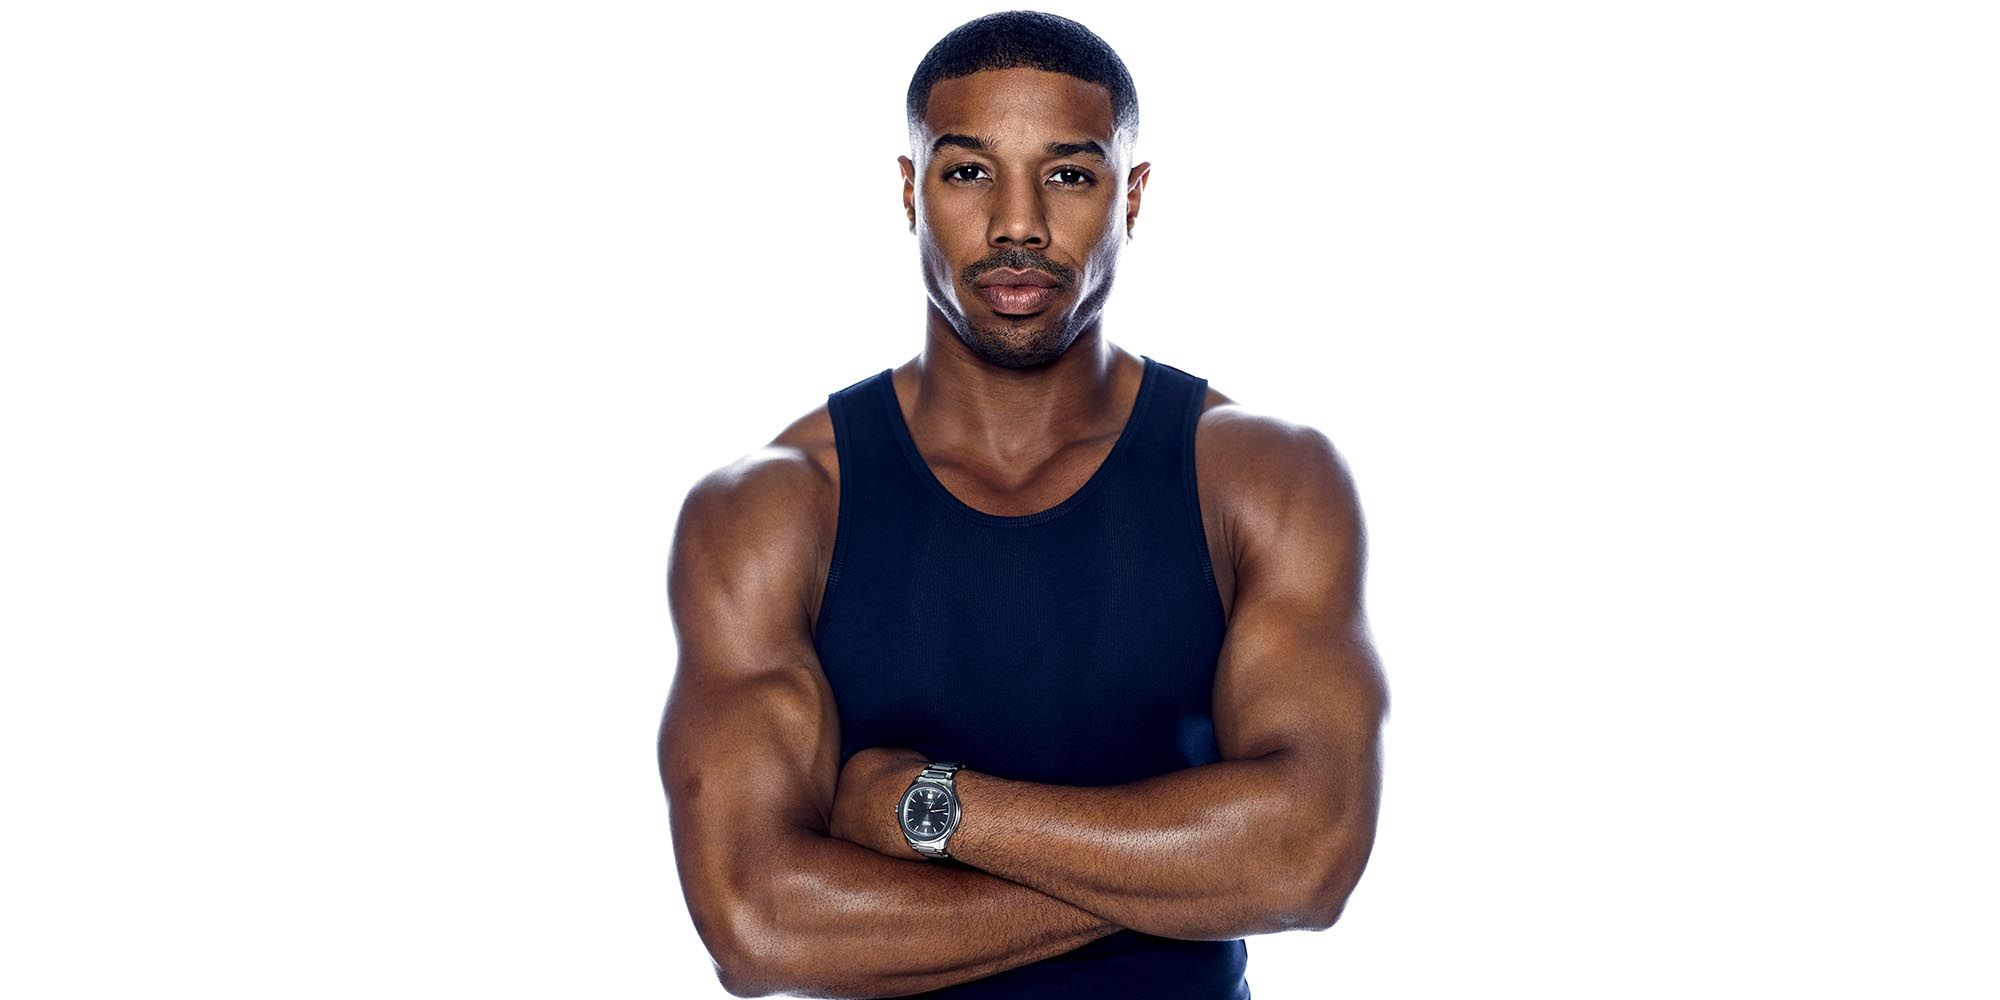 indsats Fighter Governable Michael B. Jordan's Workout and Diet Plan